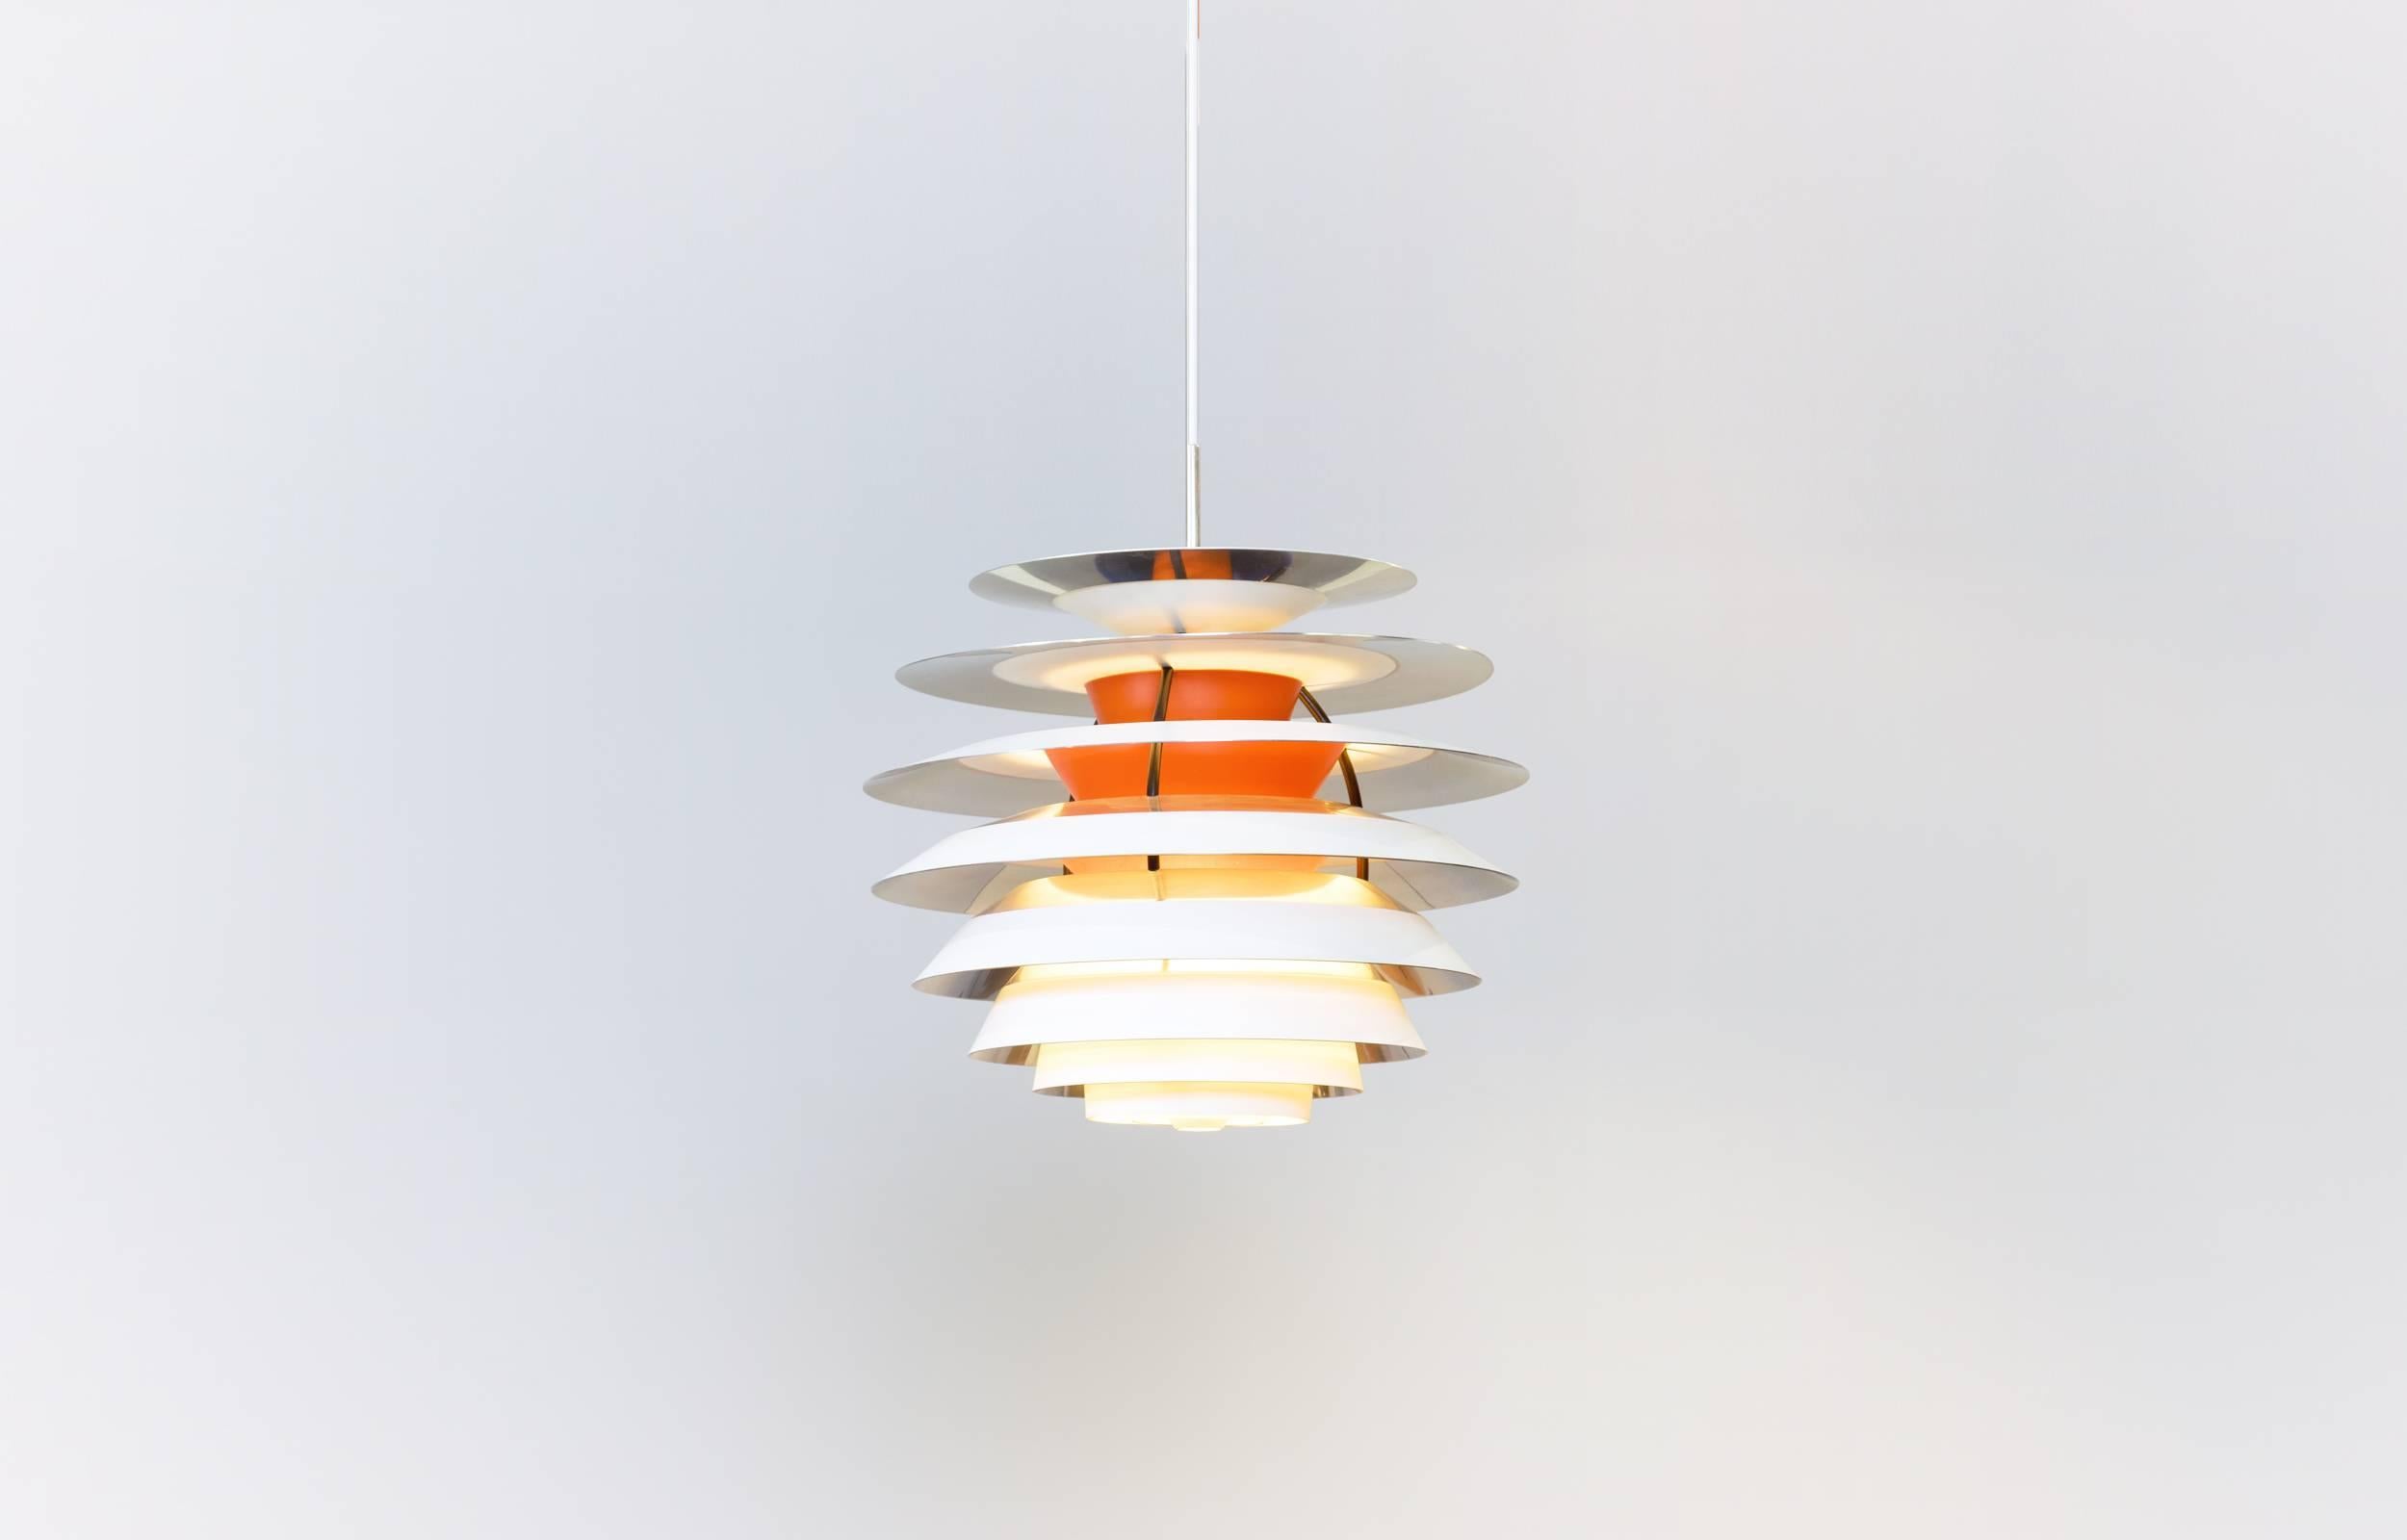 Wonderful pendant lamp. Out of production. White/orange lacquered metal and chromed parts with black laquered brass fittings. New white 2.5 m fabric cord.

Perfect original condition with minor wear consistent with age and use.